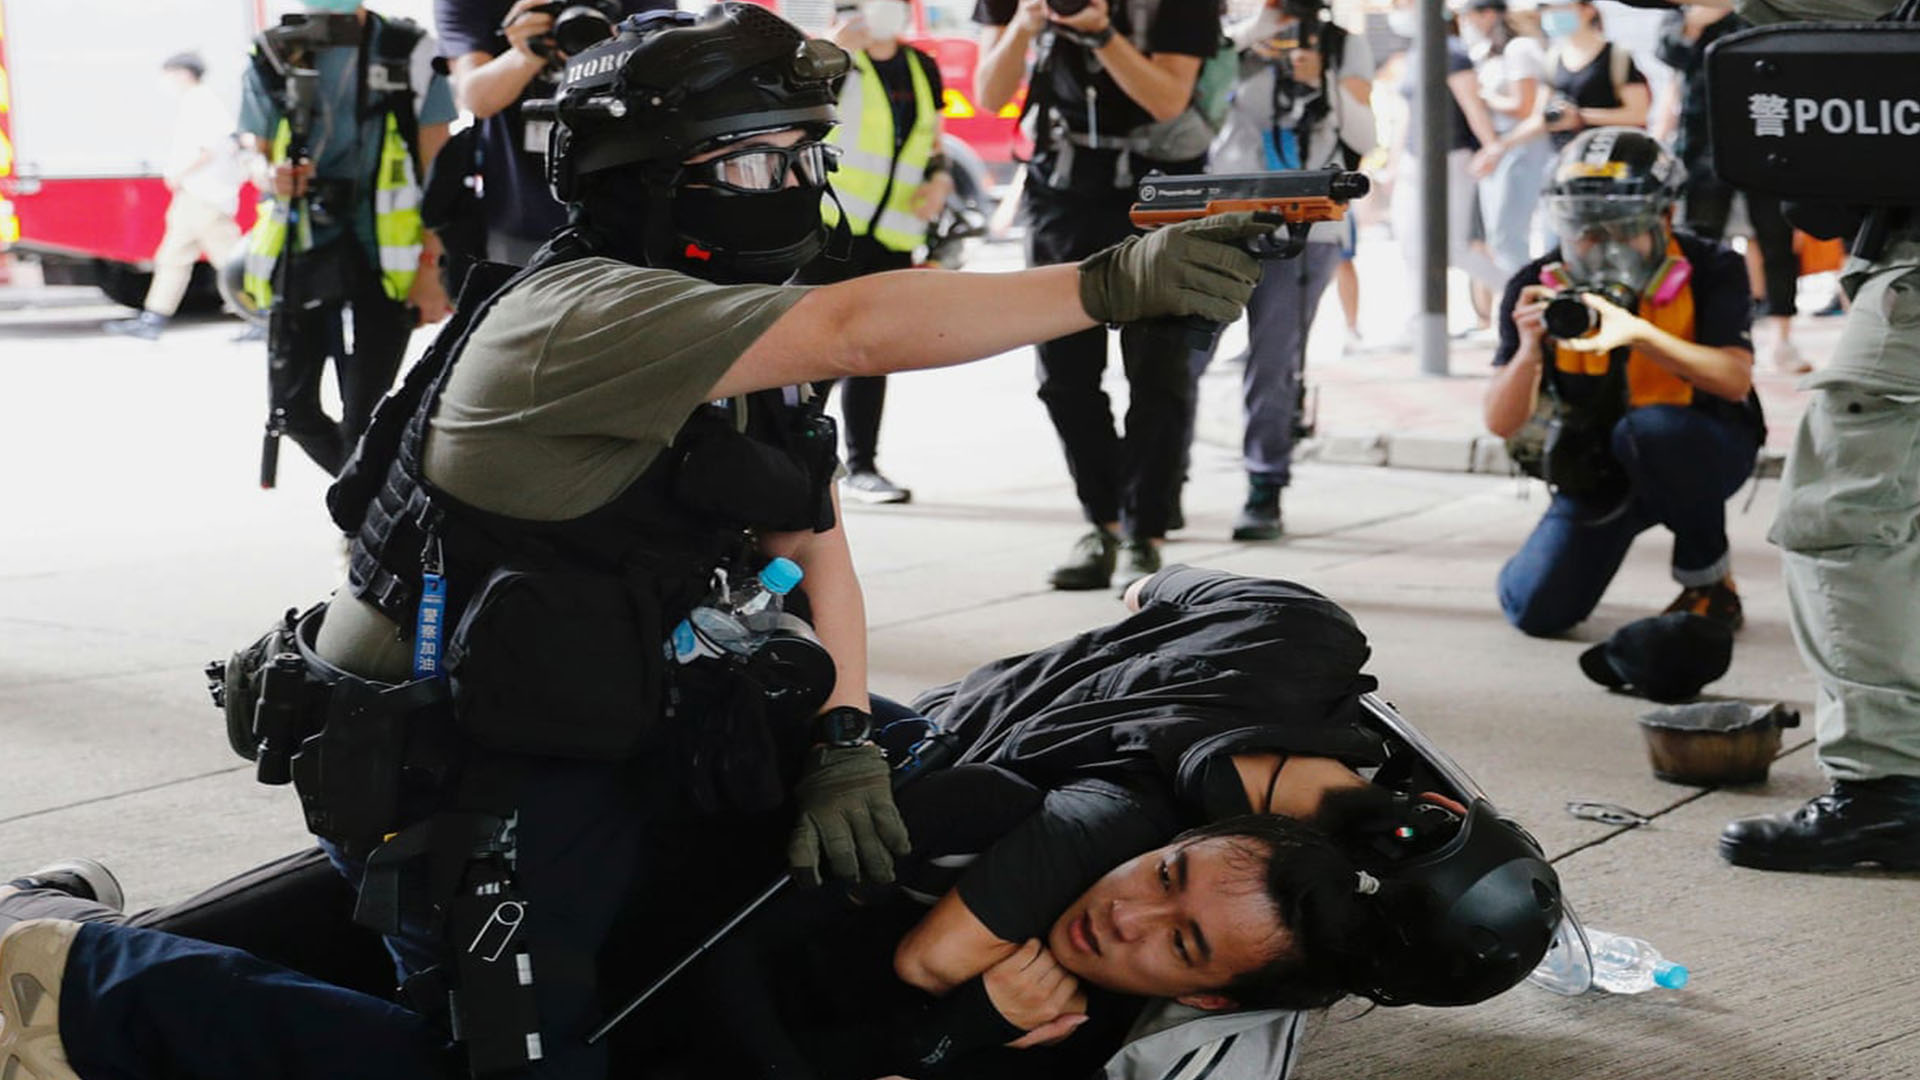 More than 370 arrested in Hong Kong protest on first day after new law